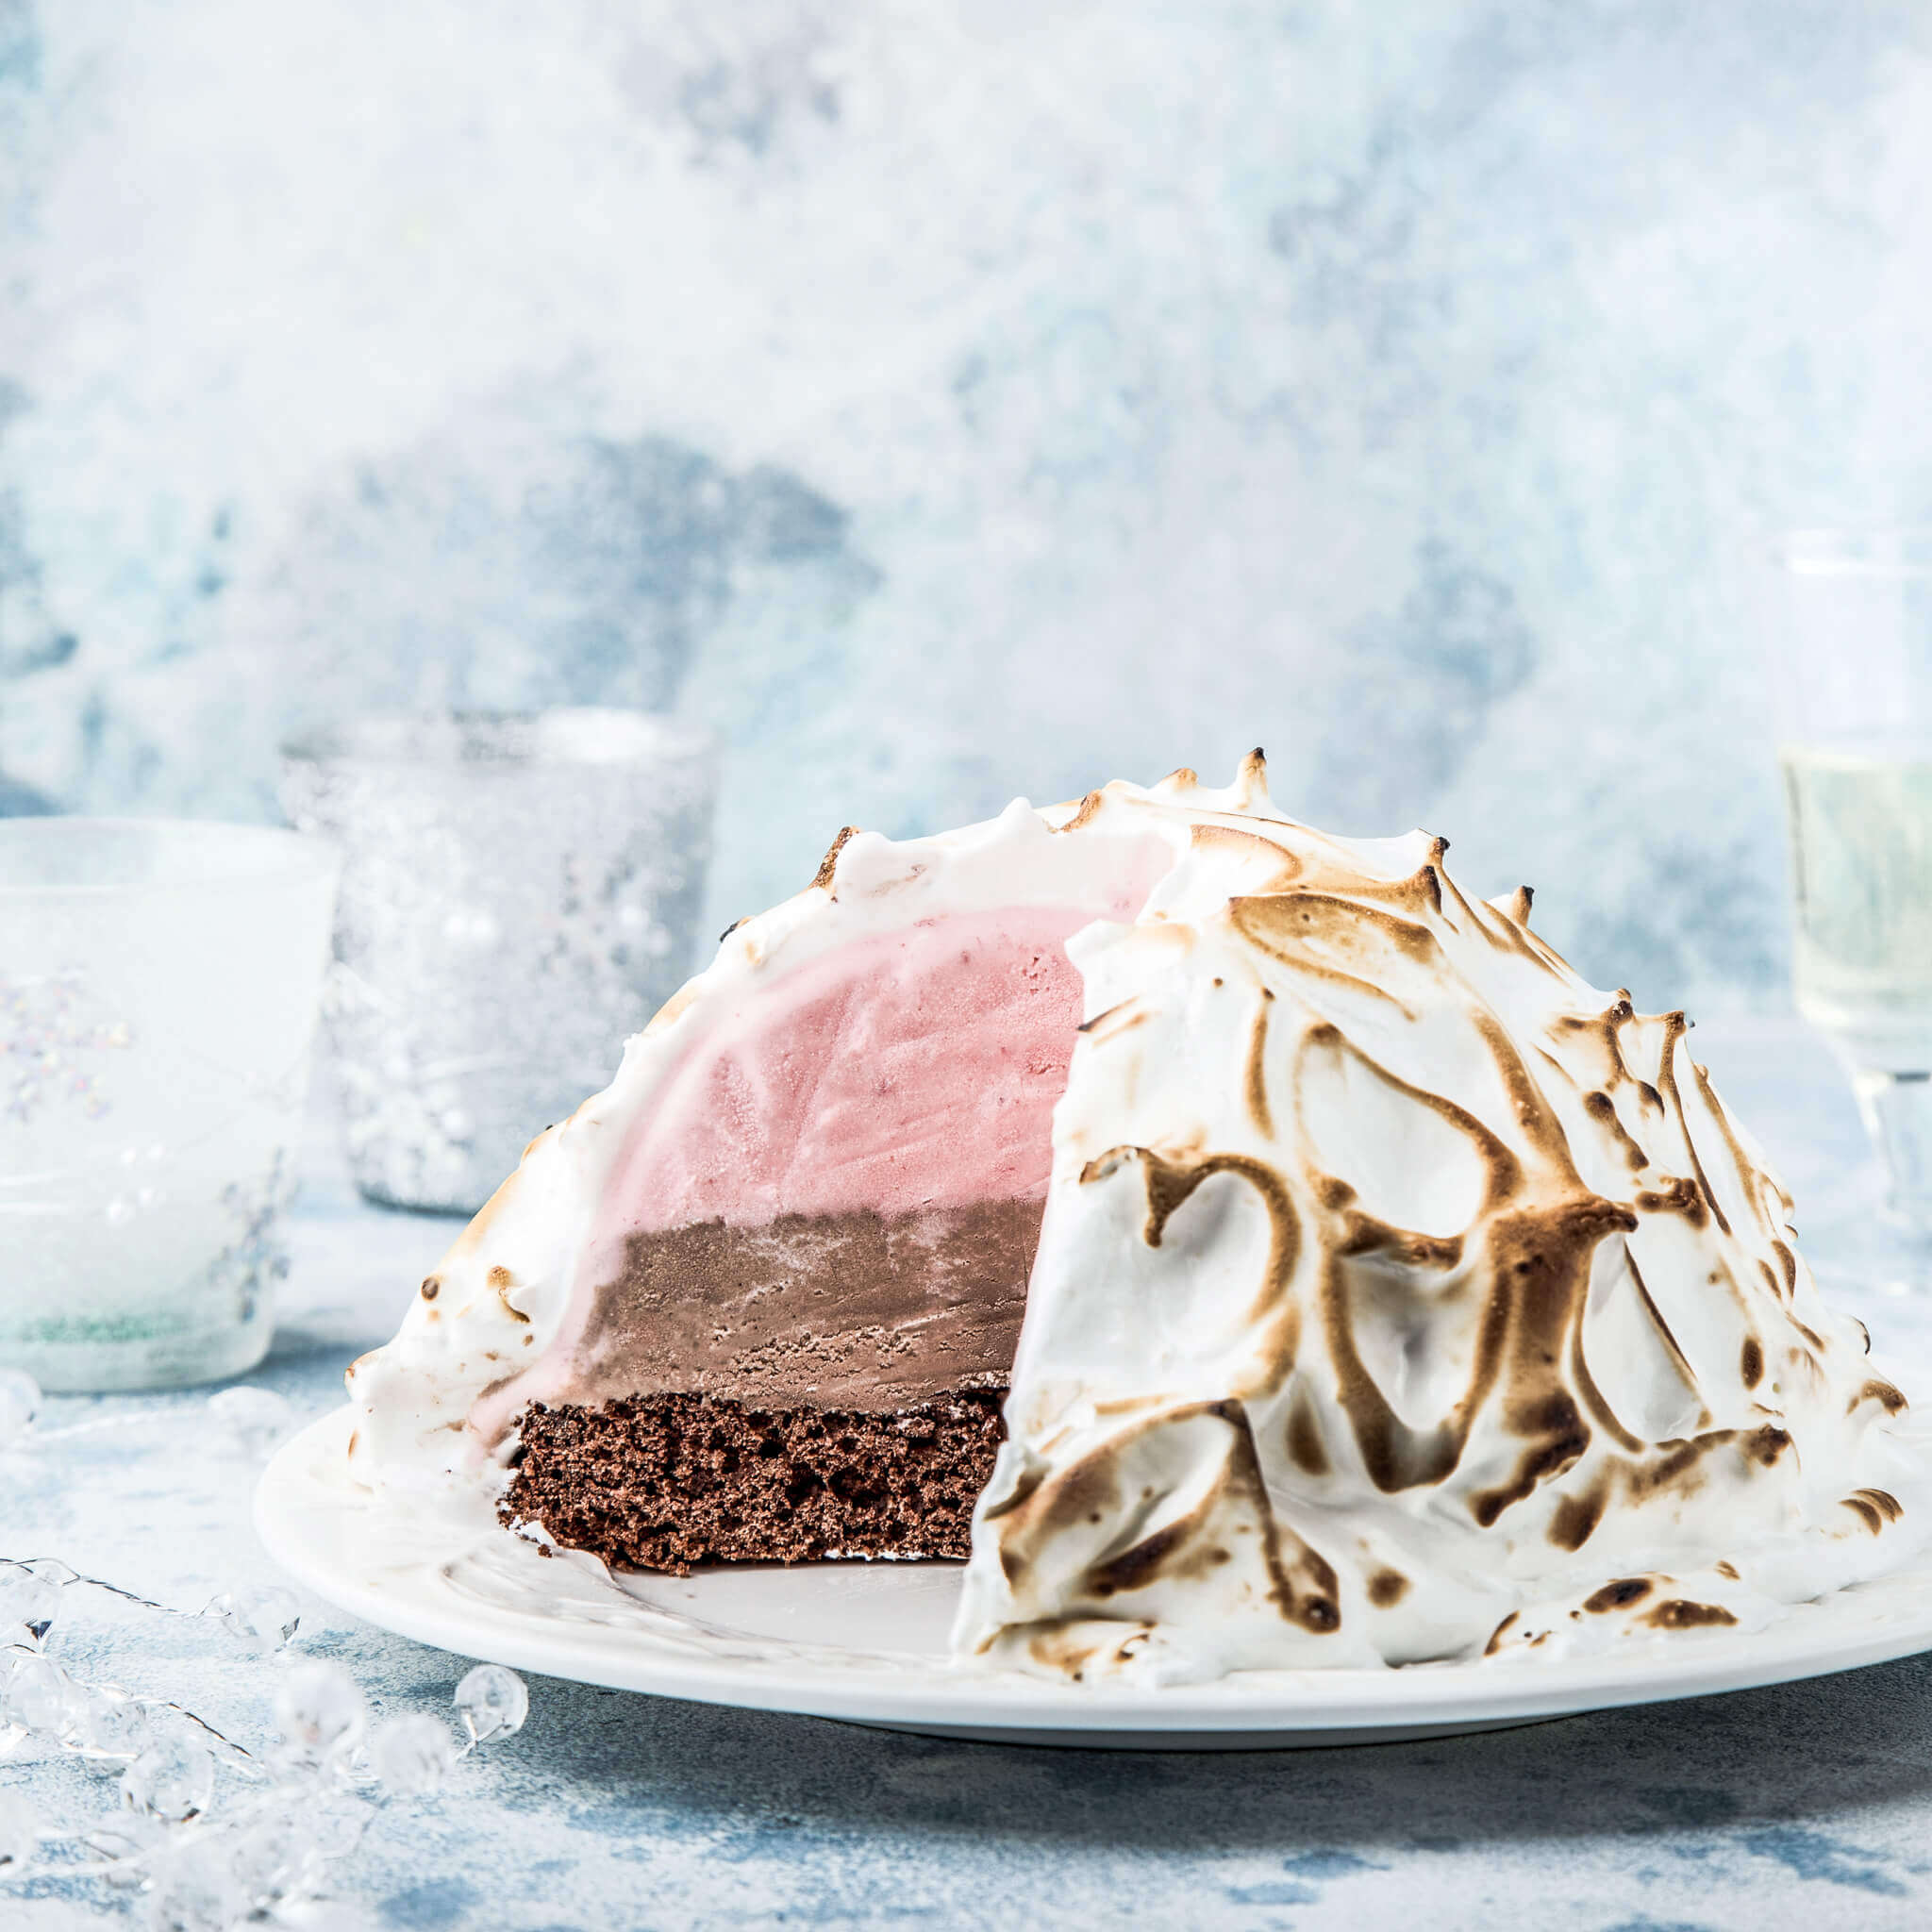 Ice cream cake (baked alaska) out of the iCombi